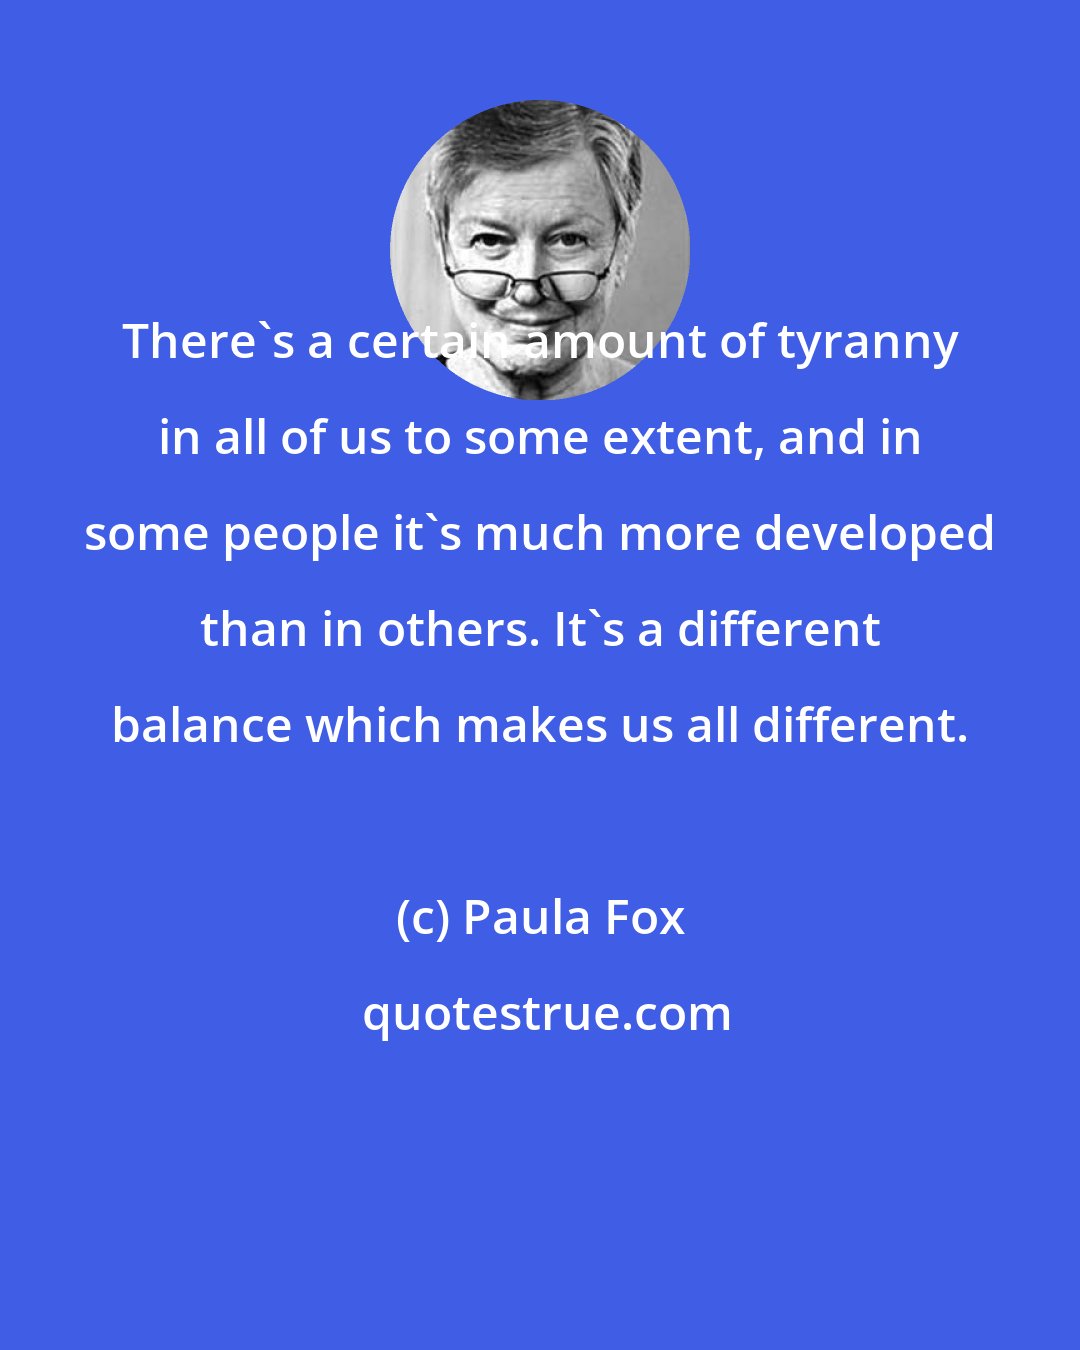 Paula Fox: There's a certain amount of tyranny in all of us to some extent, and in some people it's much more developed than in others. It's a different balance which makes us all different.